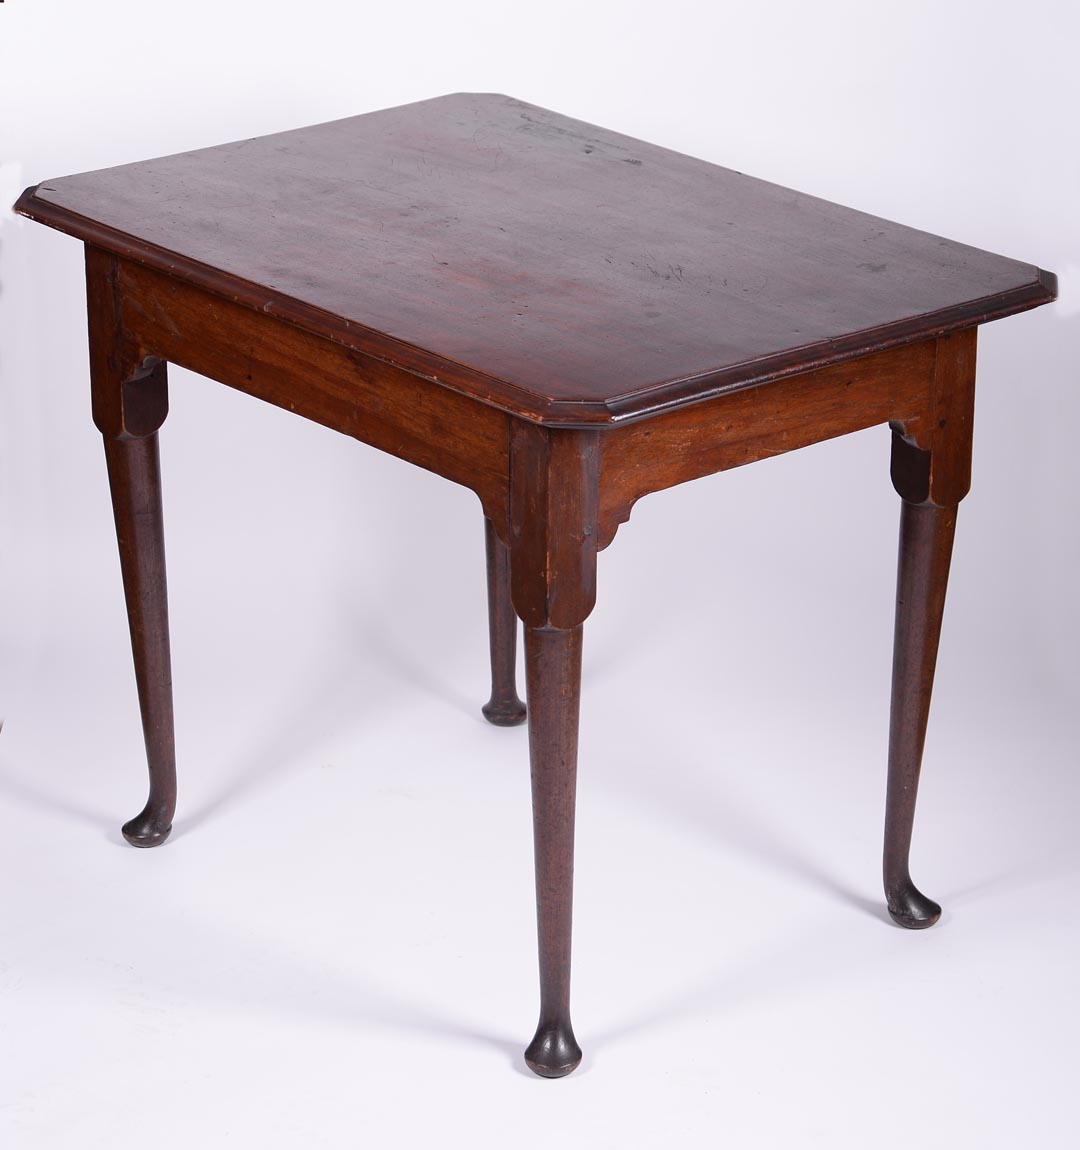 A fine and rare Queen Anne tea or center table